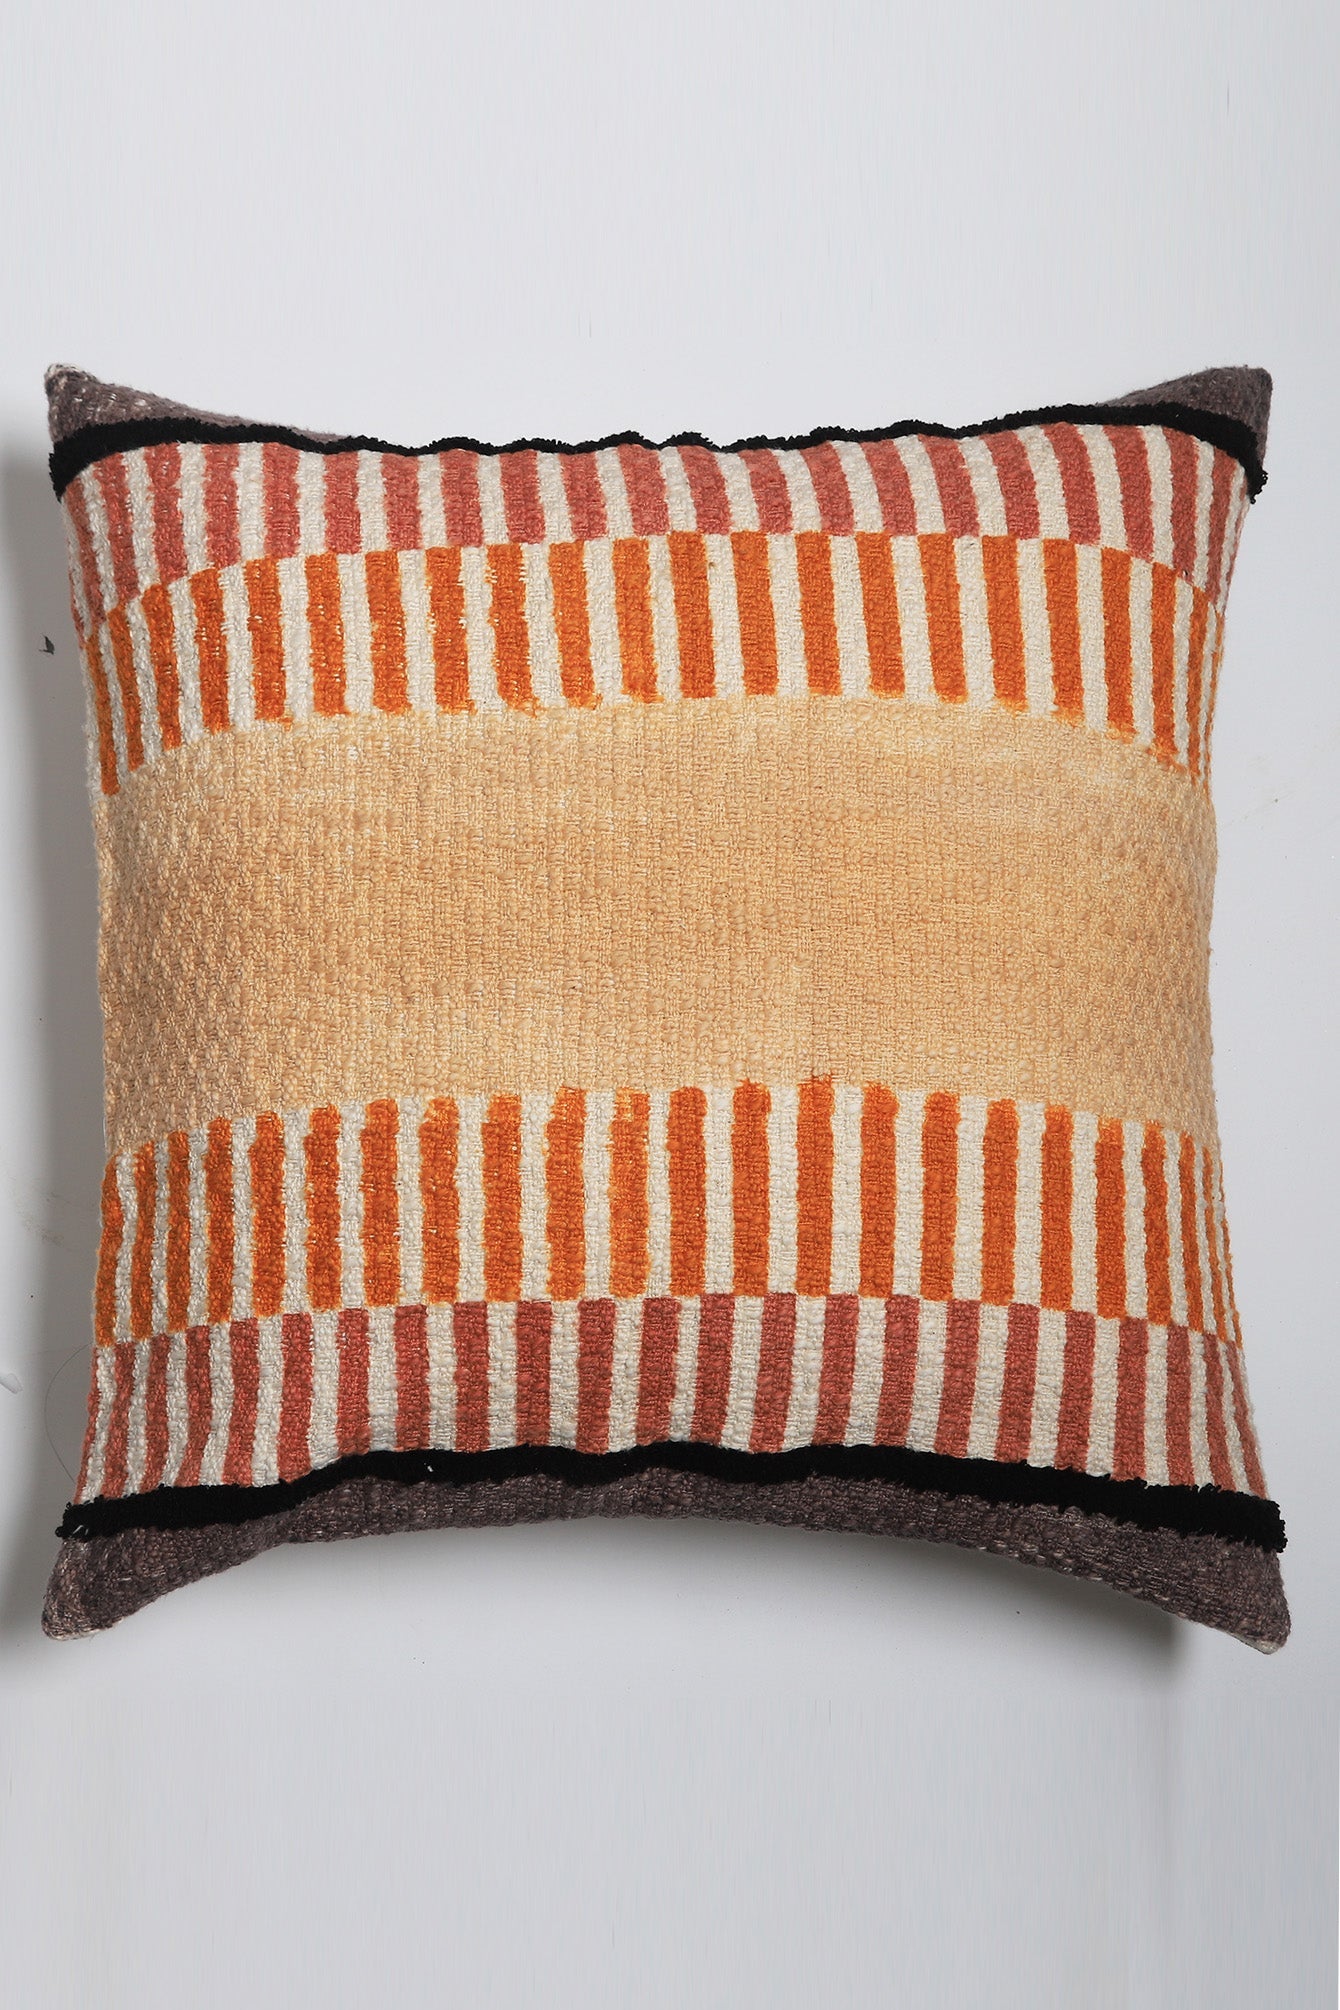 Kakanj Embroidery Over Block Printed Cushion Cover